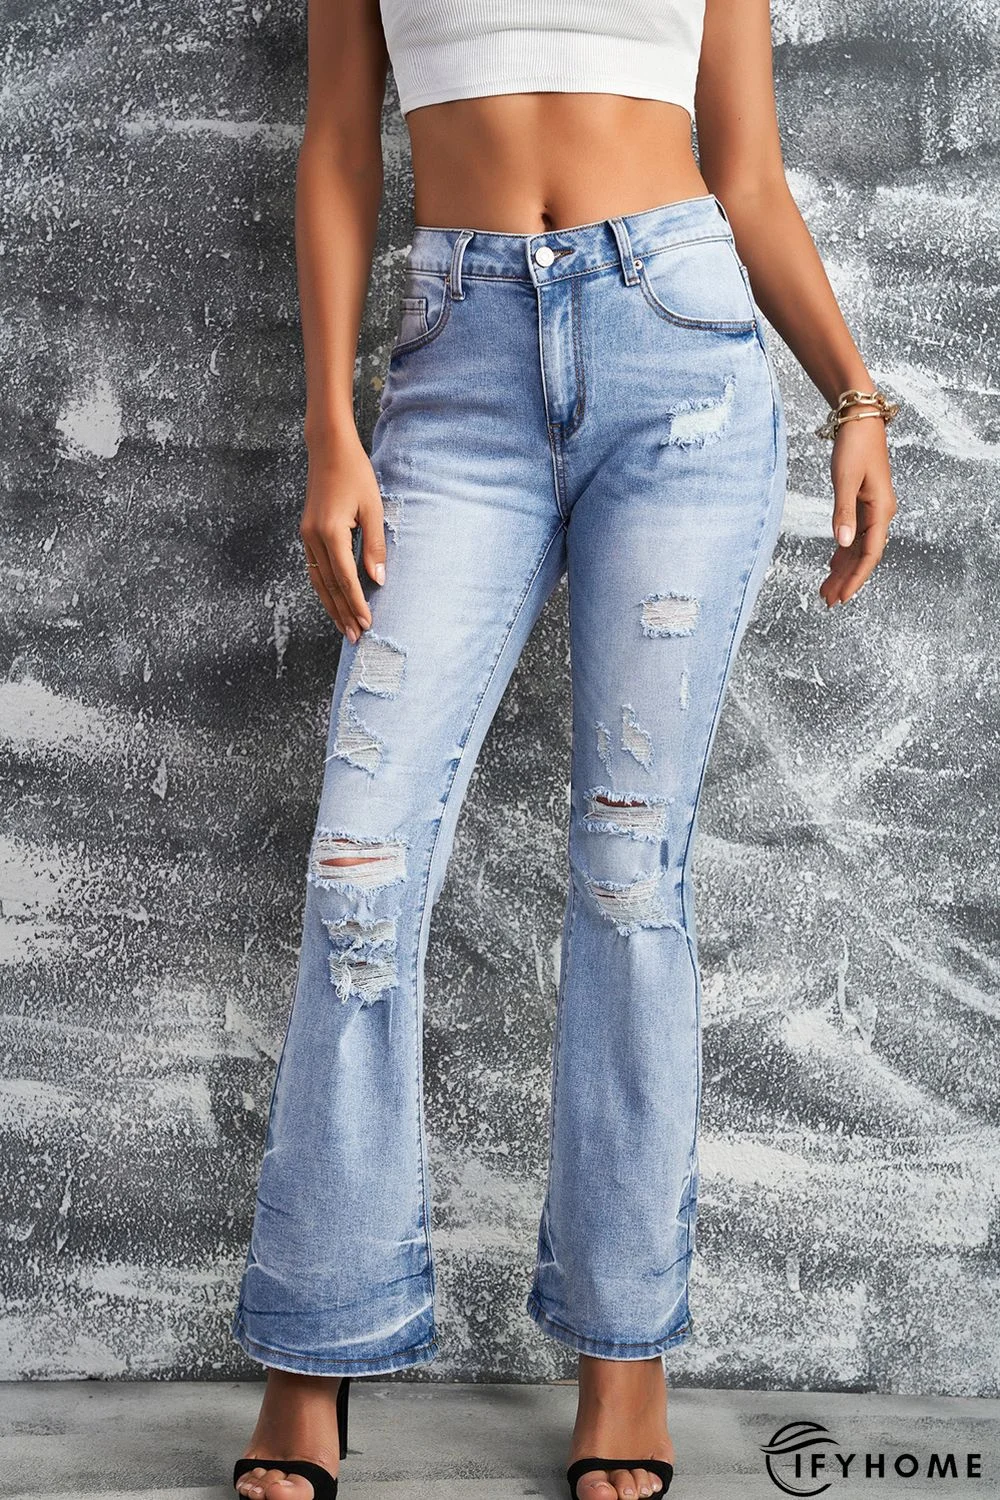 Sky Blue Distressed Mid Waist Ripped Flare Jeans | IFYHOME